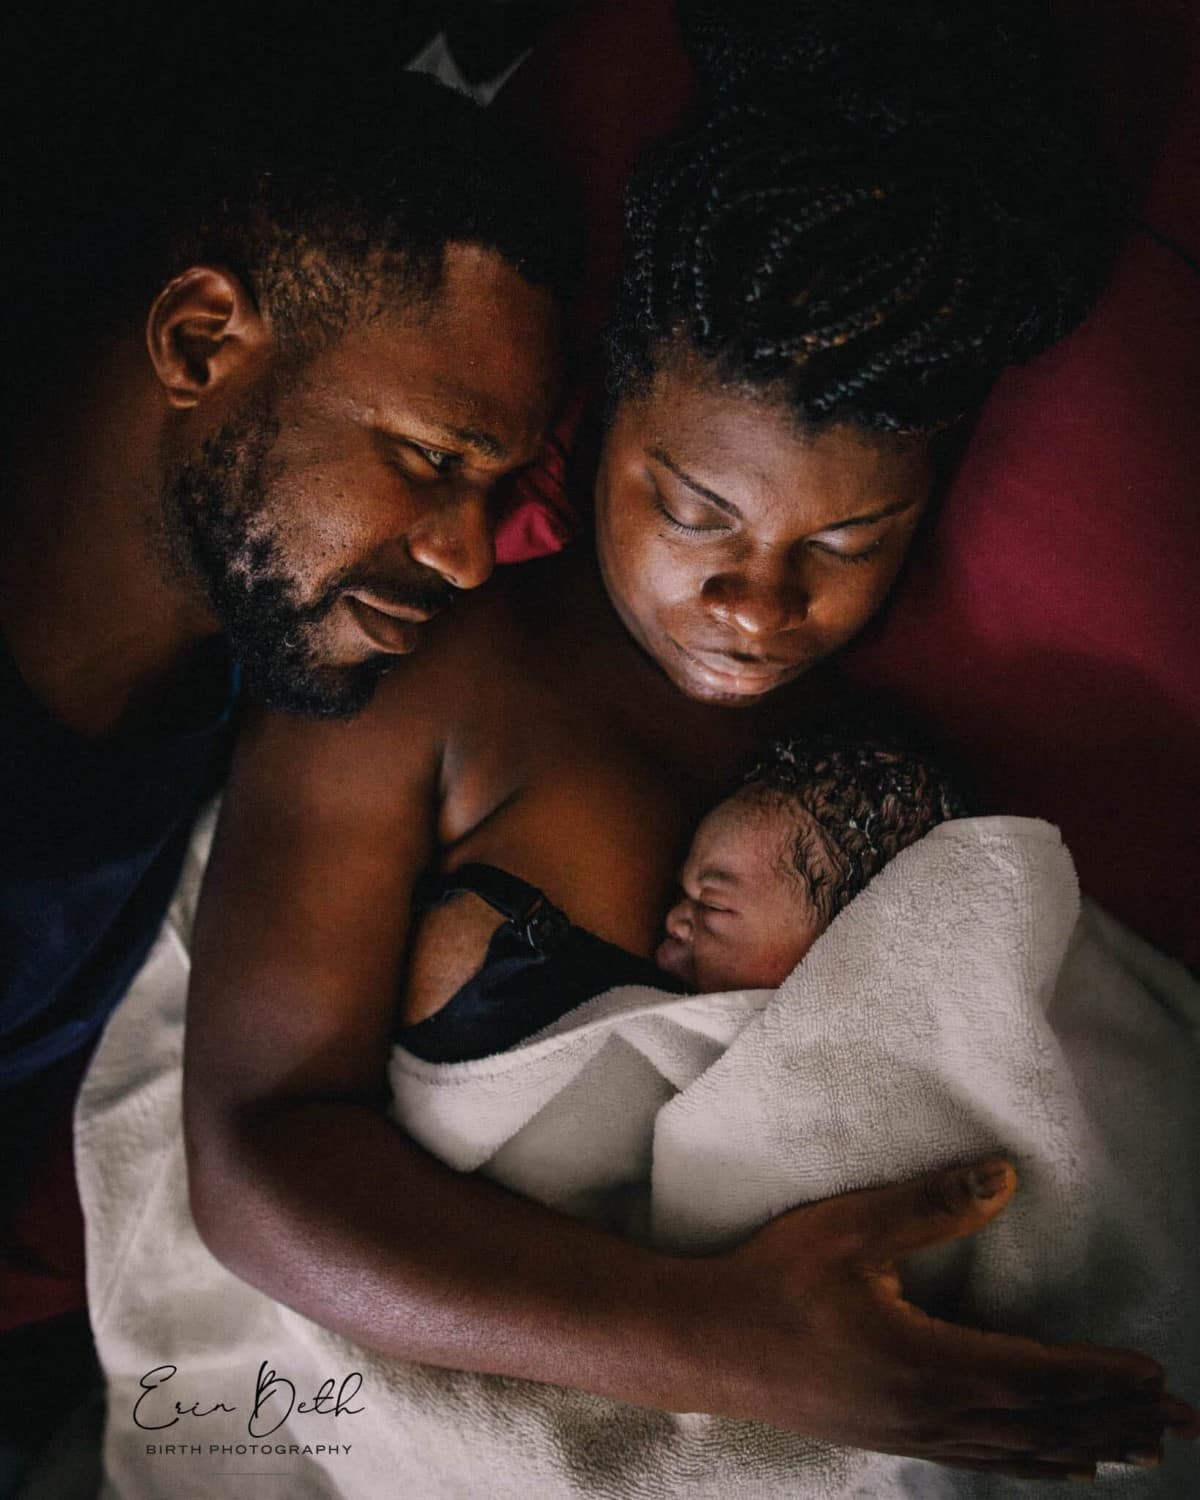 Family nestled together after birth of child